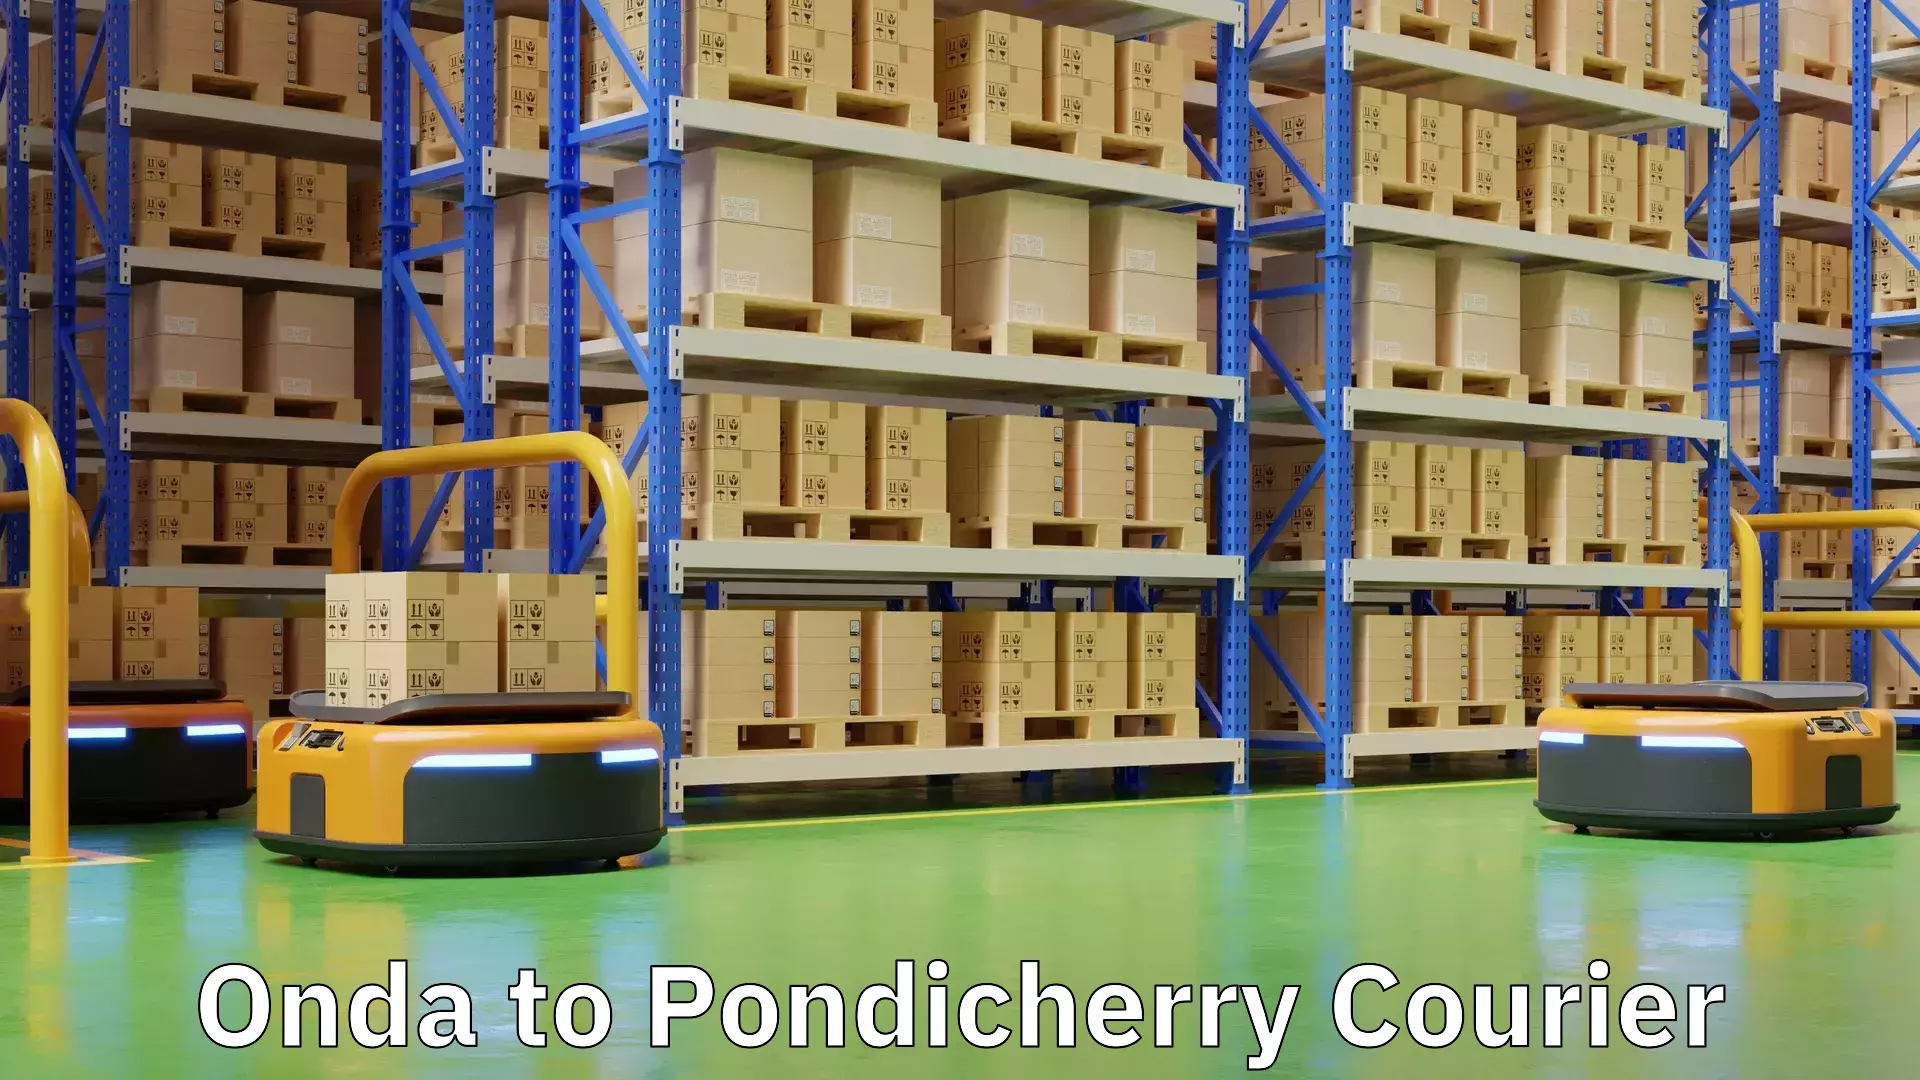 Package delivery network Onda to Pondicherry